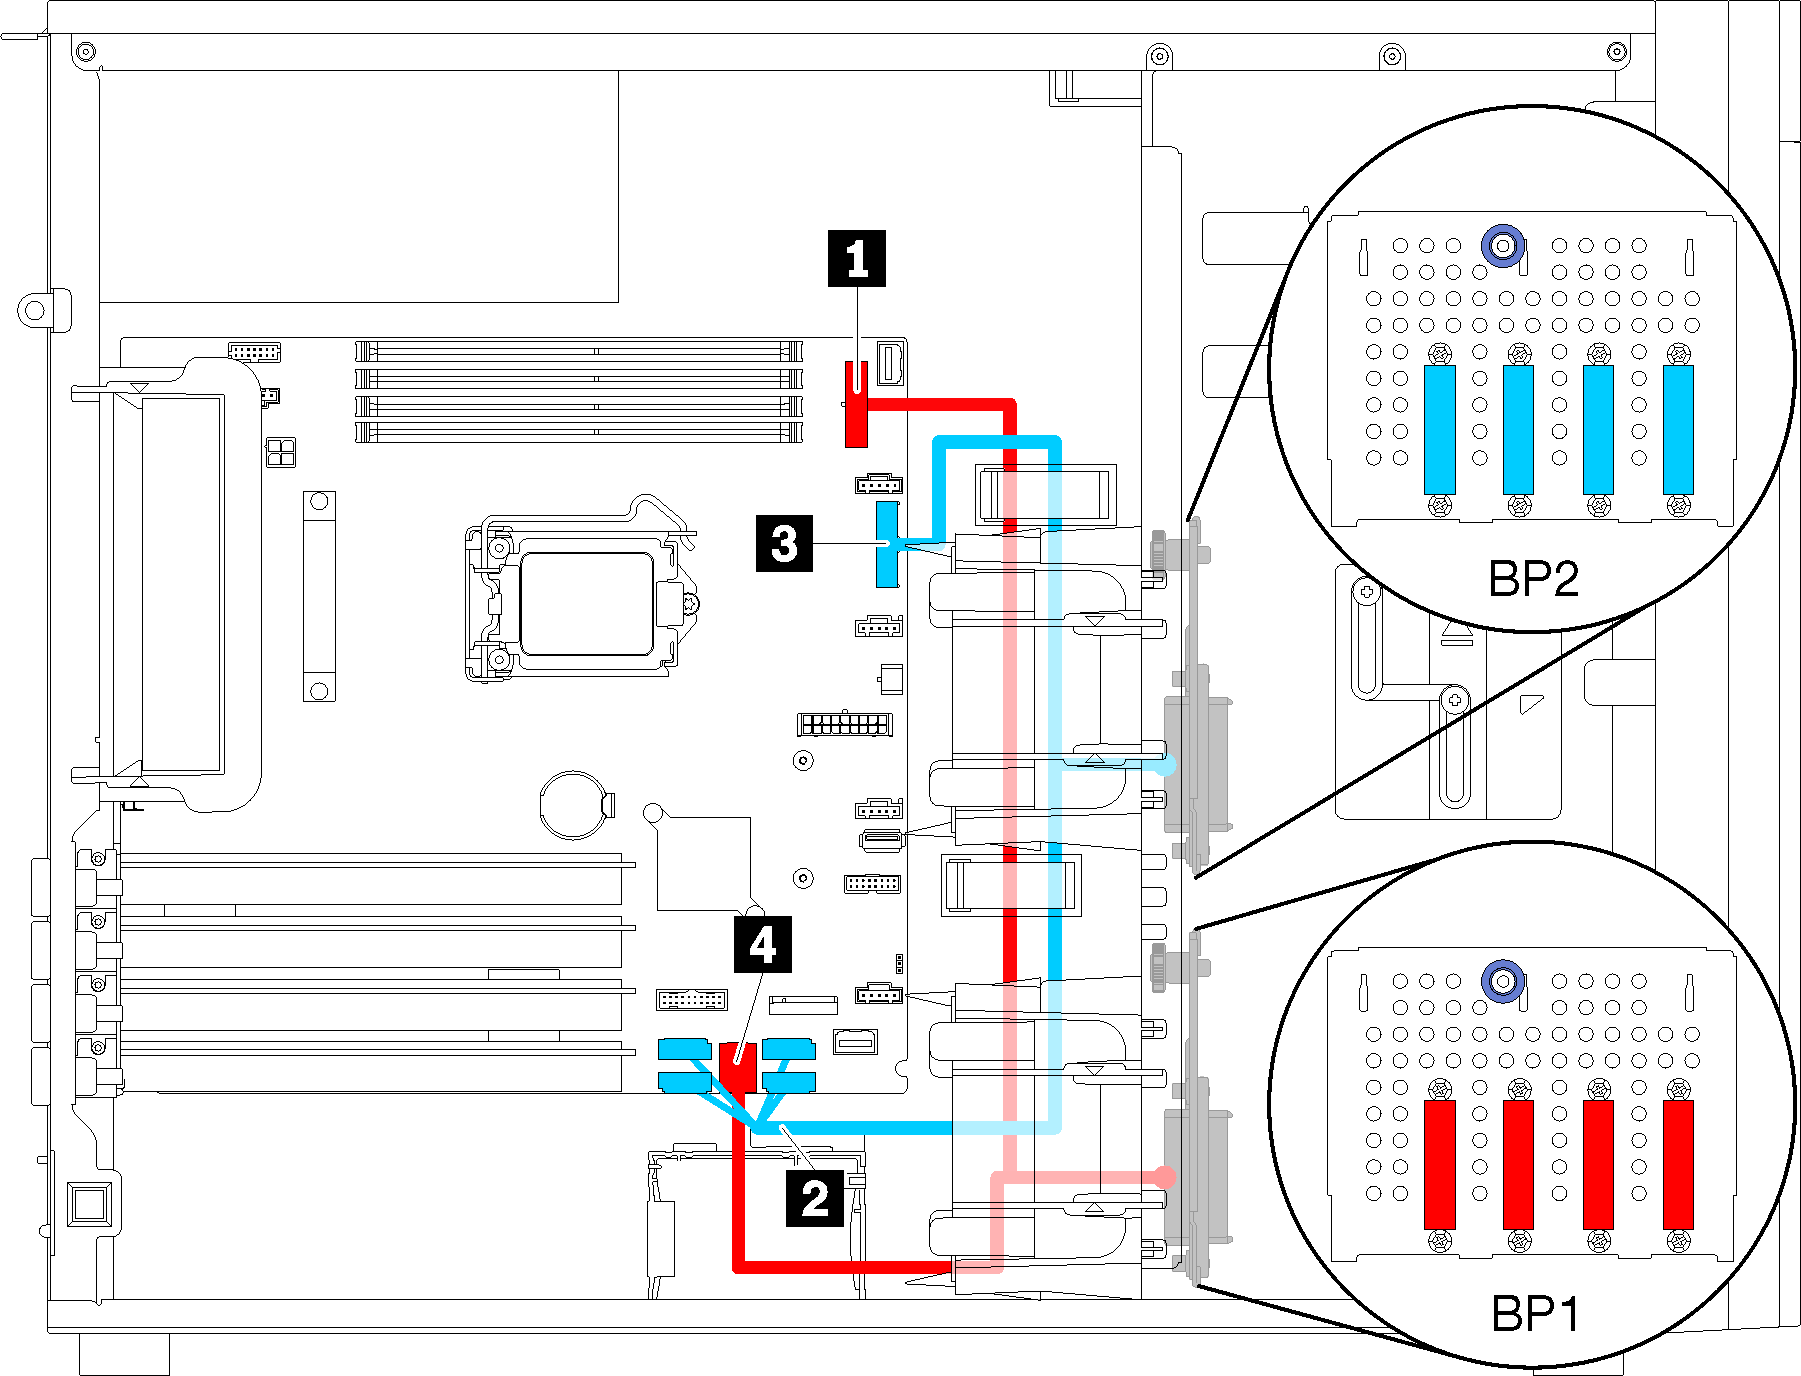 Cable routing for server models with eight 3.5-inch simple-swap drives (software RAID)